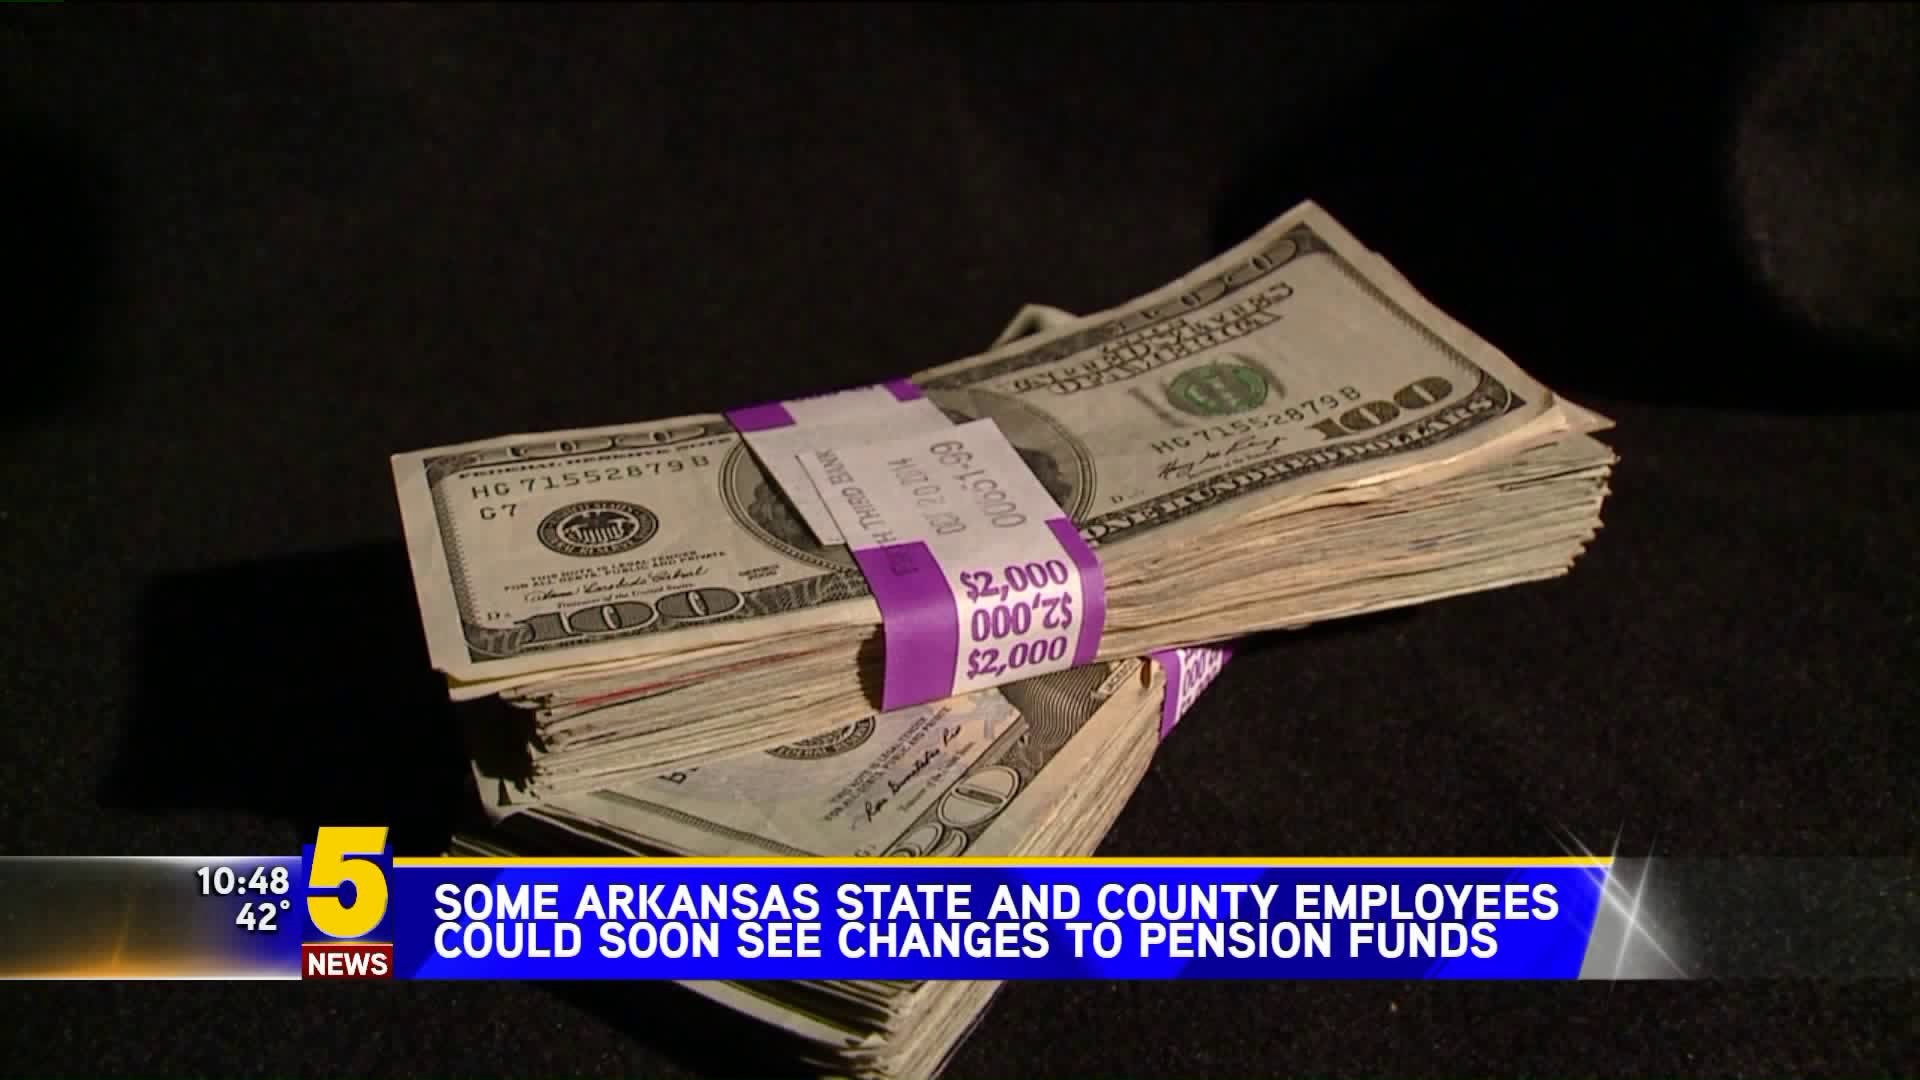 Arkansas State And County Employees Could See Changes To Their